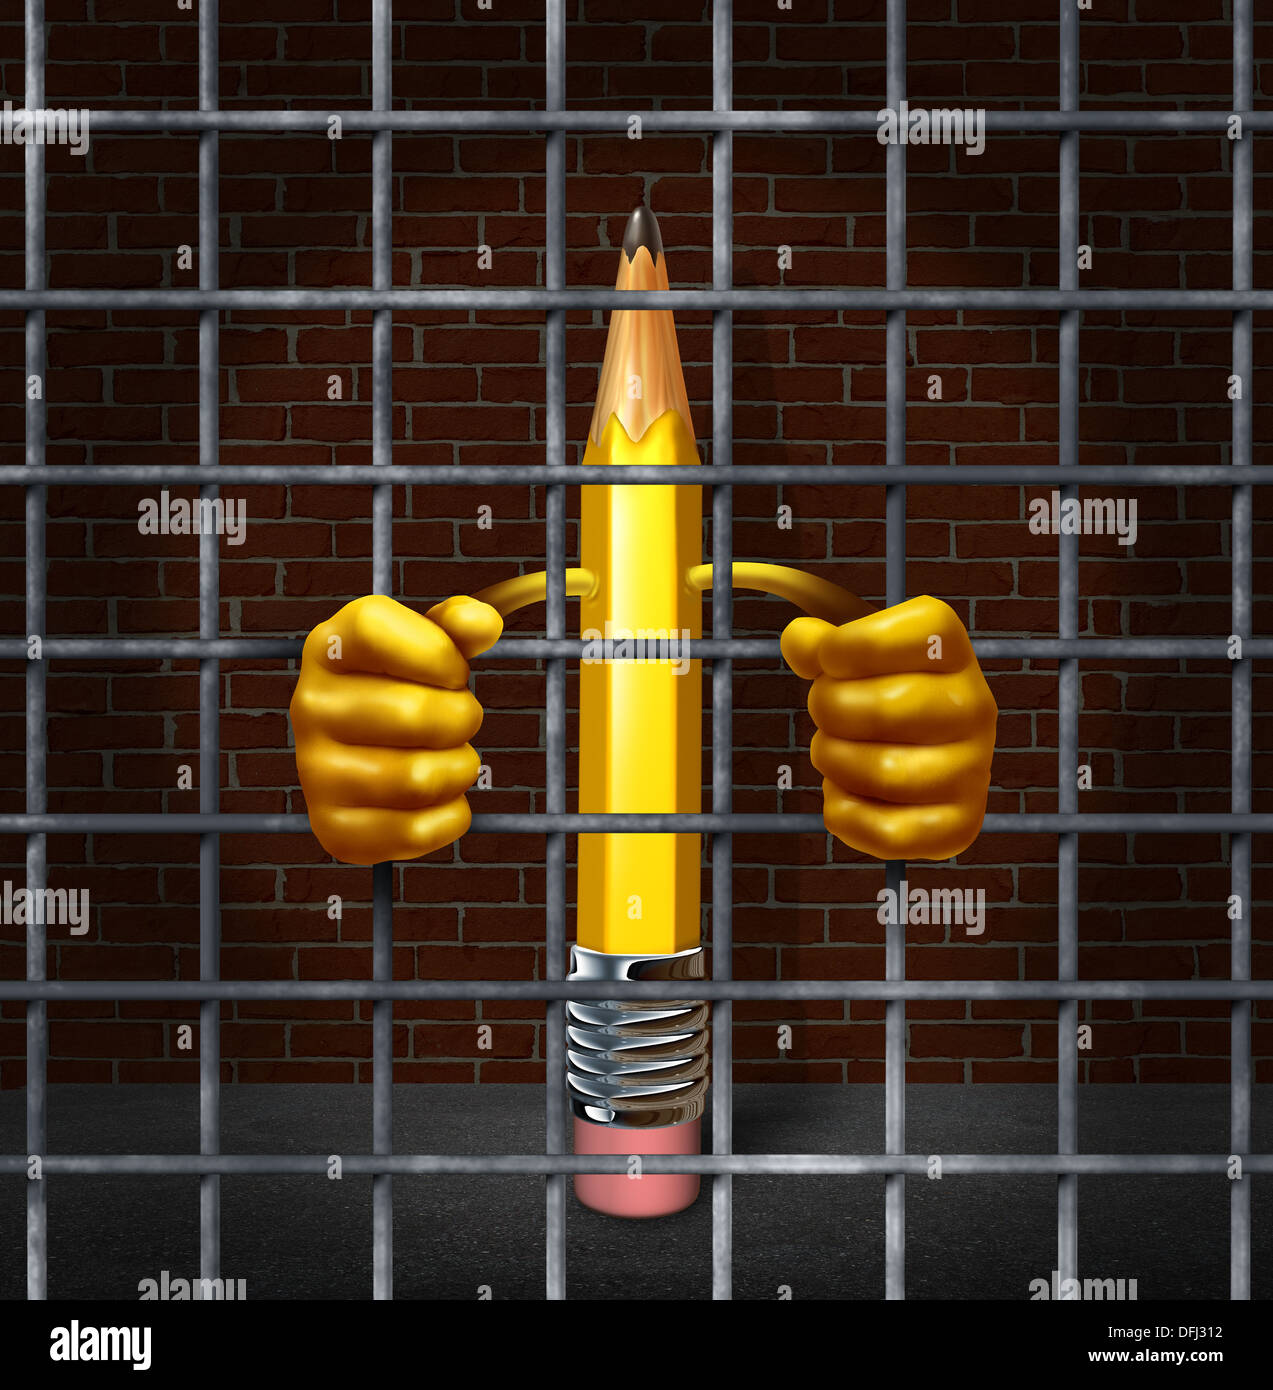 Creative block creativity concept with a pencil character in a prison jail cell holding metal cage bars as a symbol of being stuck and lacking freedom of expression as a business symbol or icon for juvenile delinquent. Stock Photo